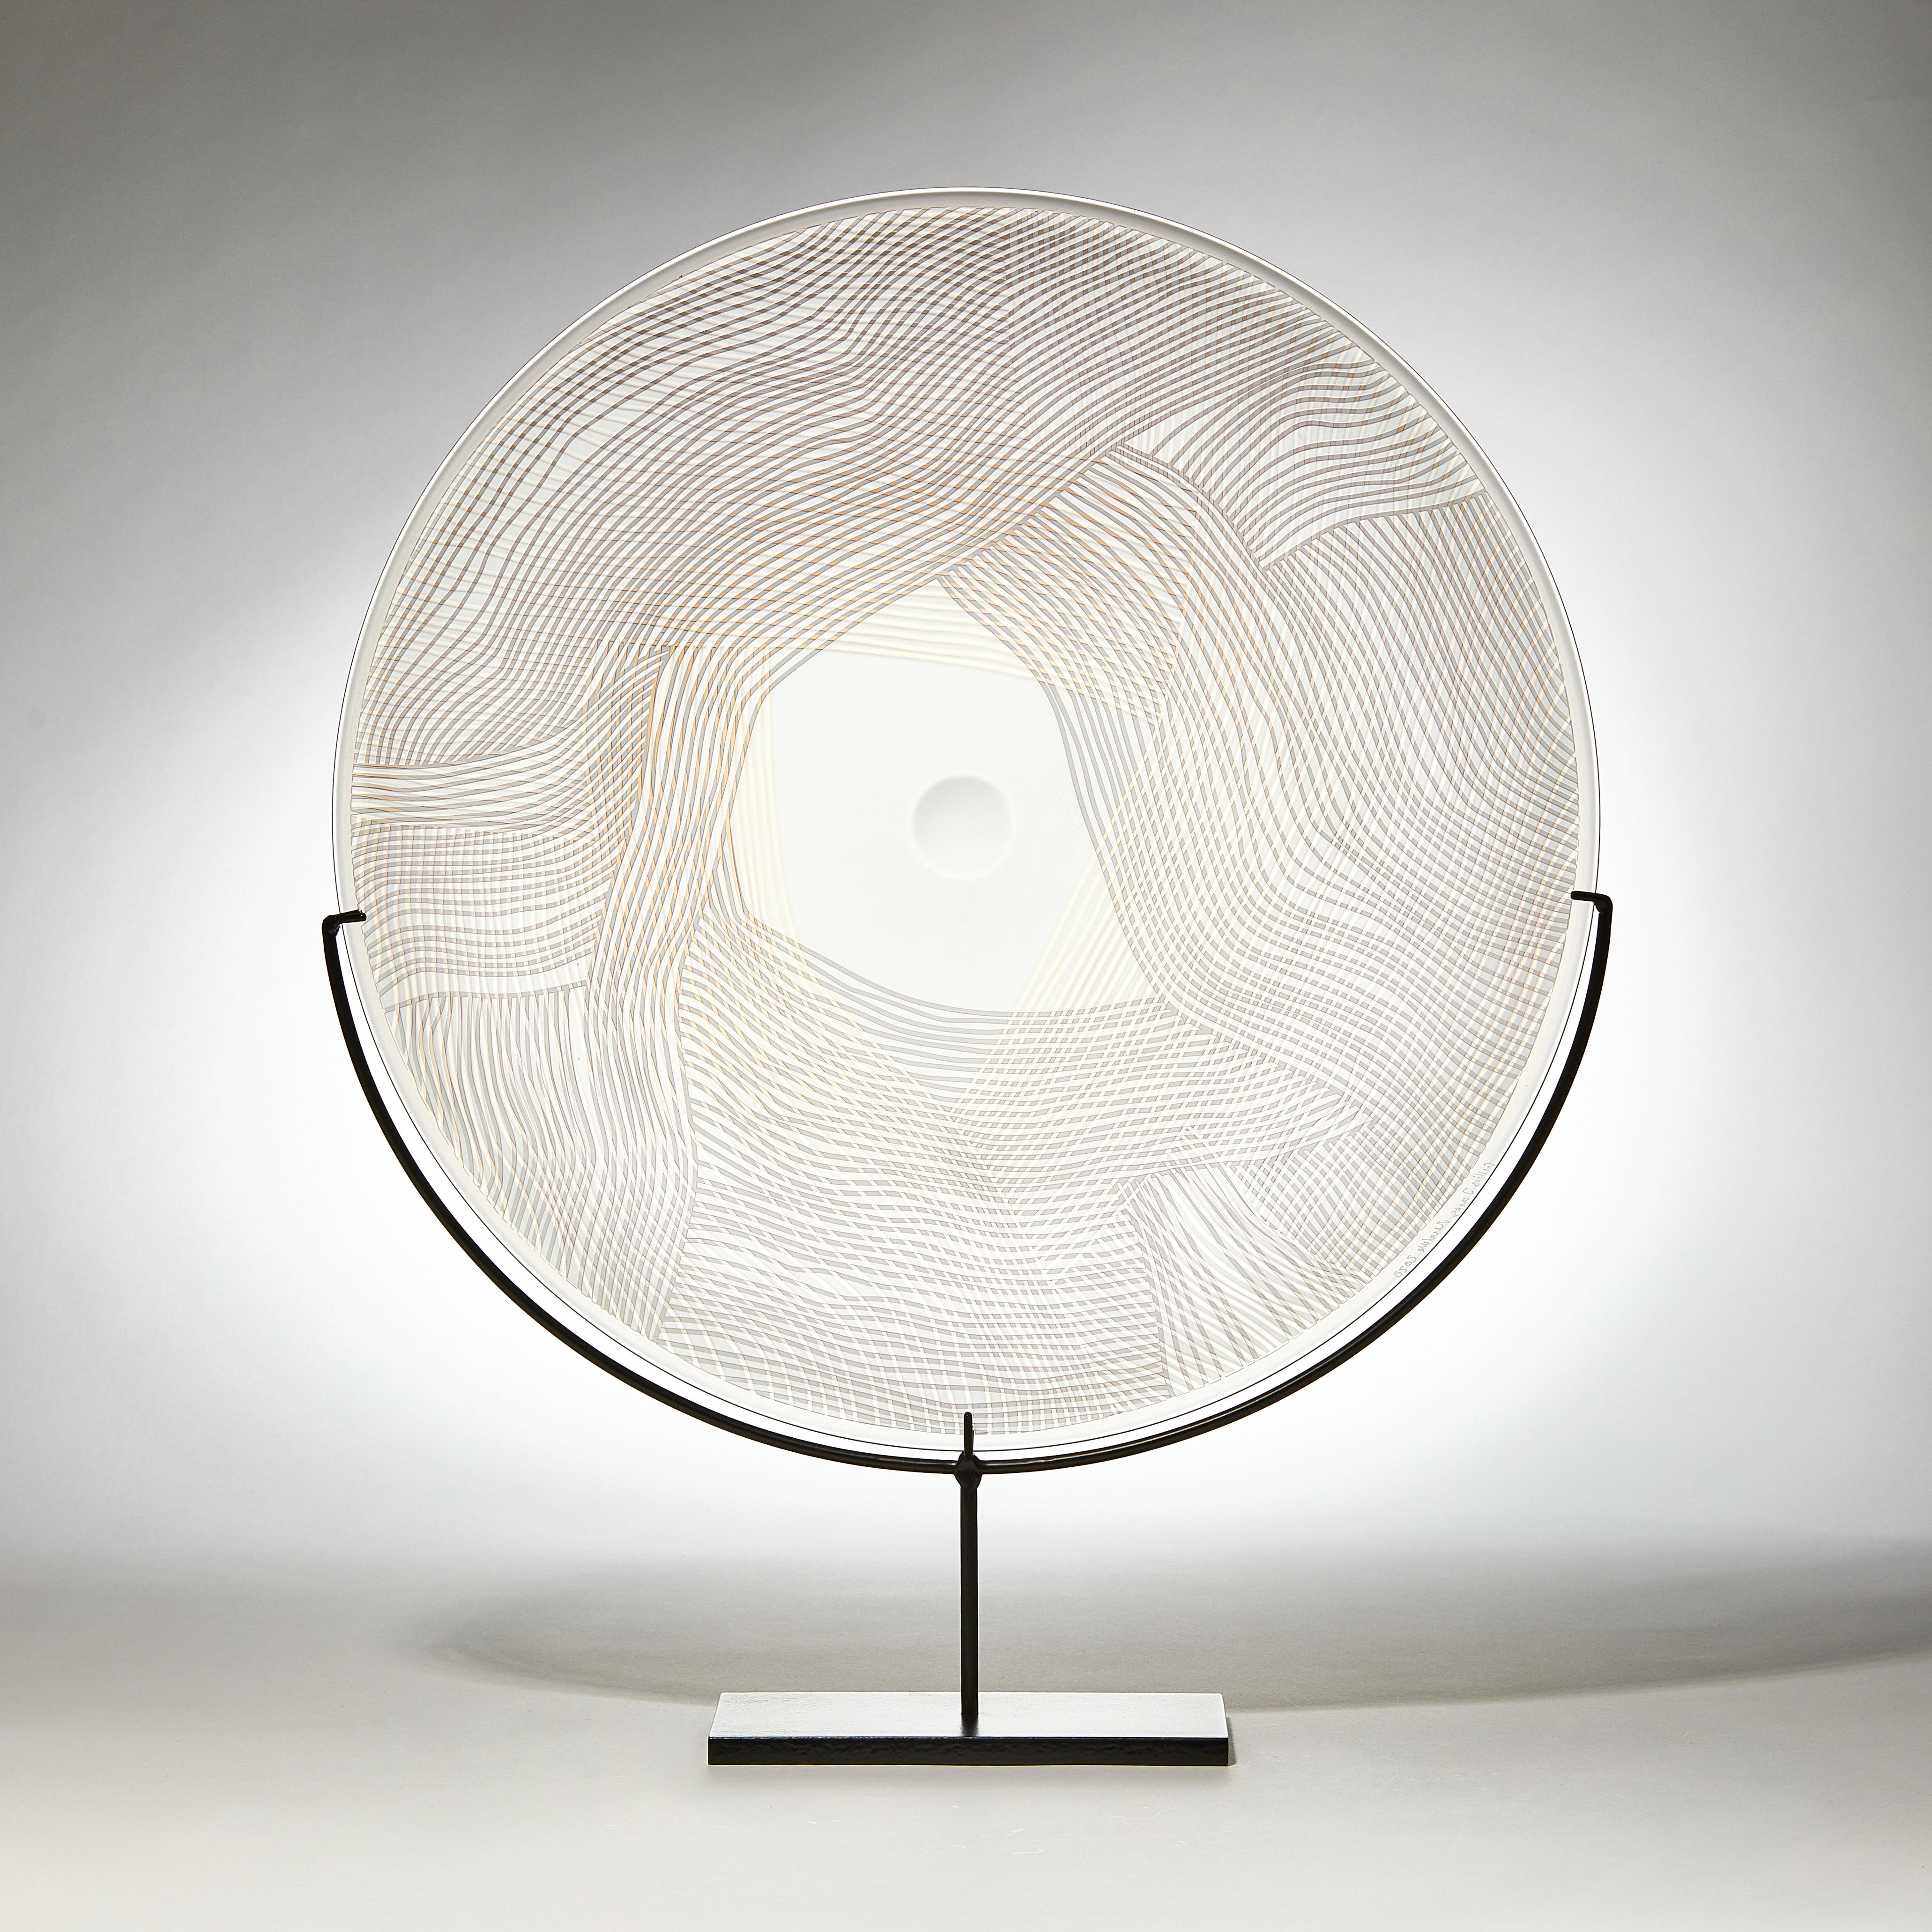 Layer on Layer is a unique gold, grey and clear hand blown and etched glass sculptural plate by the British artist Kate Jones, with a painted steel base.

Created with Stephen Gillies, with whom Jones makes many works in collaboration, these